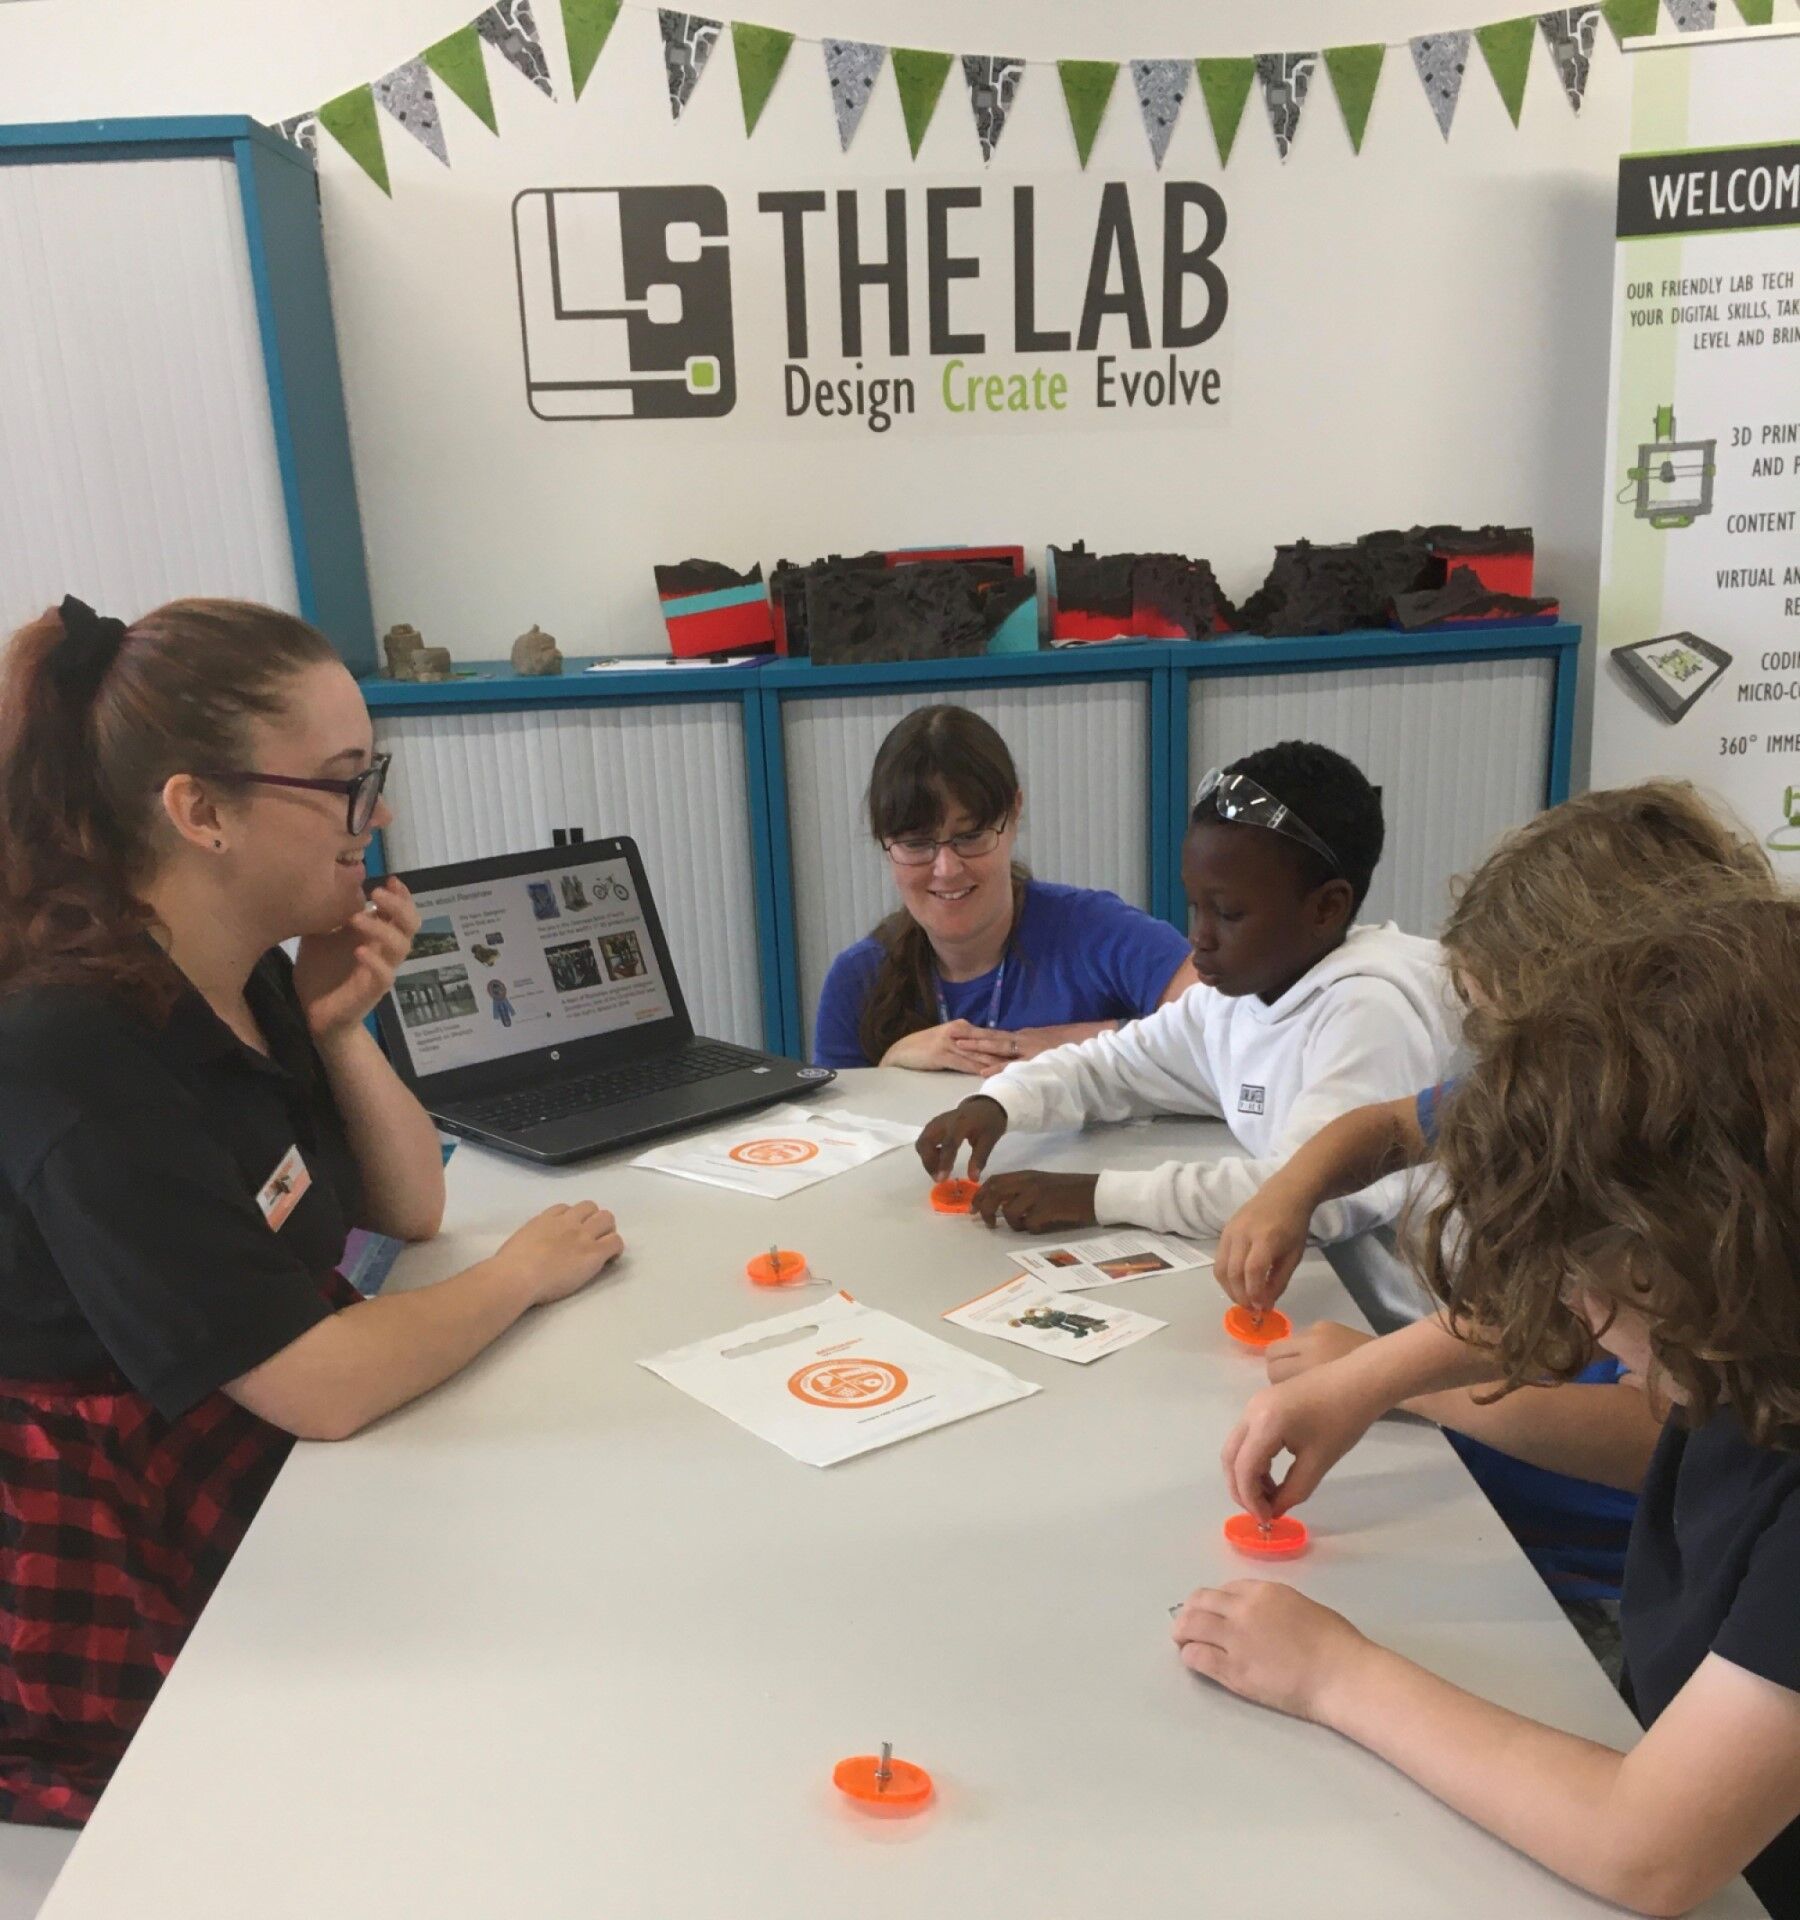 Renishaw supports science-themed Summer Reading Challenge